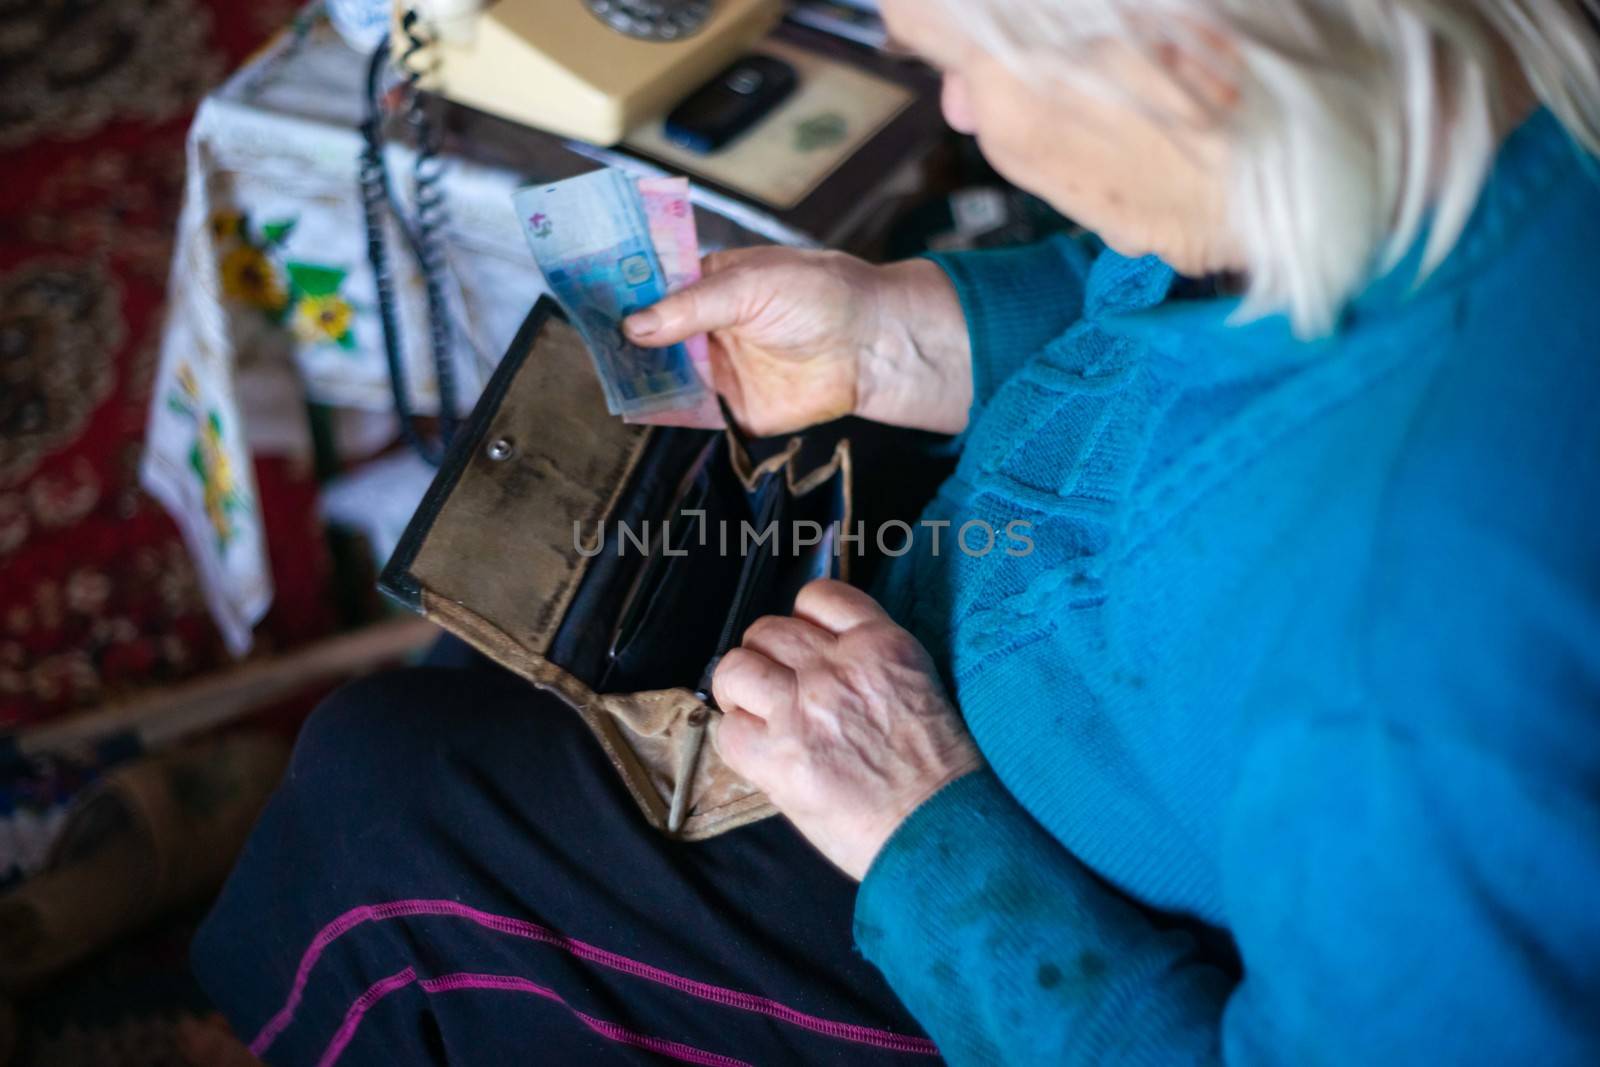 Old poor gray hair woman putting paper Ukrainian money in her vintage leather wallet by her hands. Woman is sad. Poor life in village. Old age not good. Low-light photo. by alexsdriver